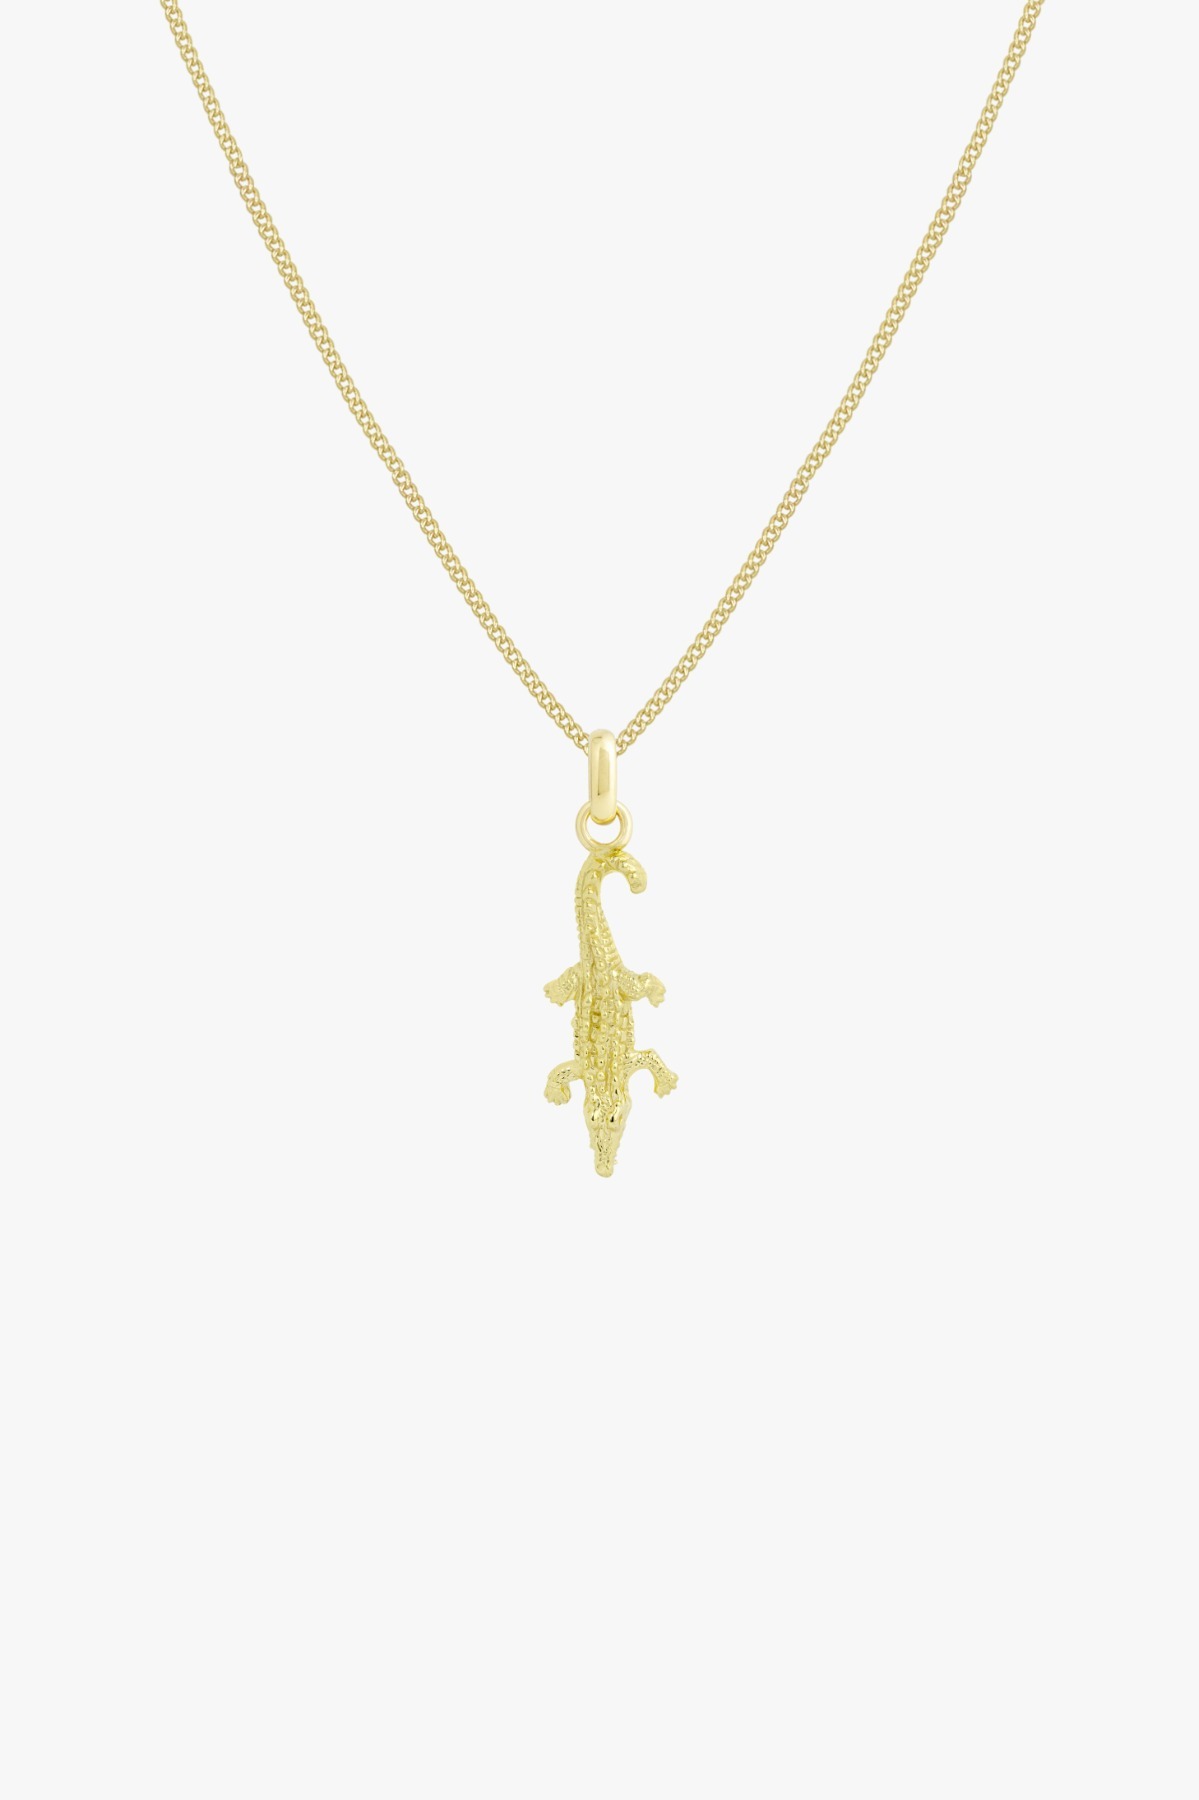 wildthings collectables - Crocodile pendant gold plated 2